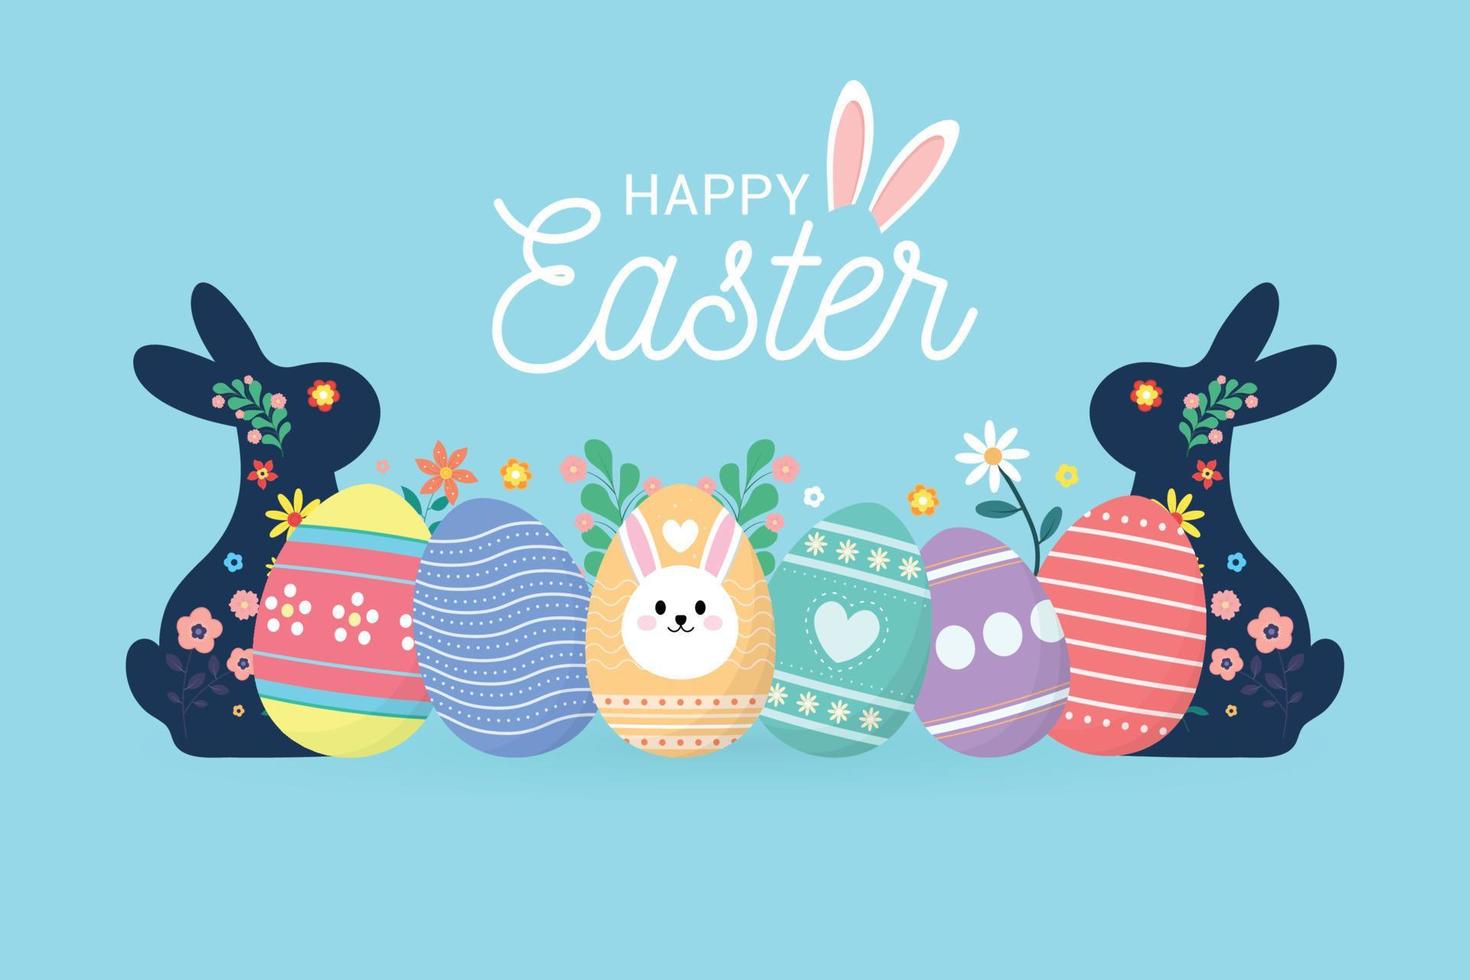 Happy easter day background vector illustration.